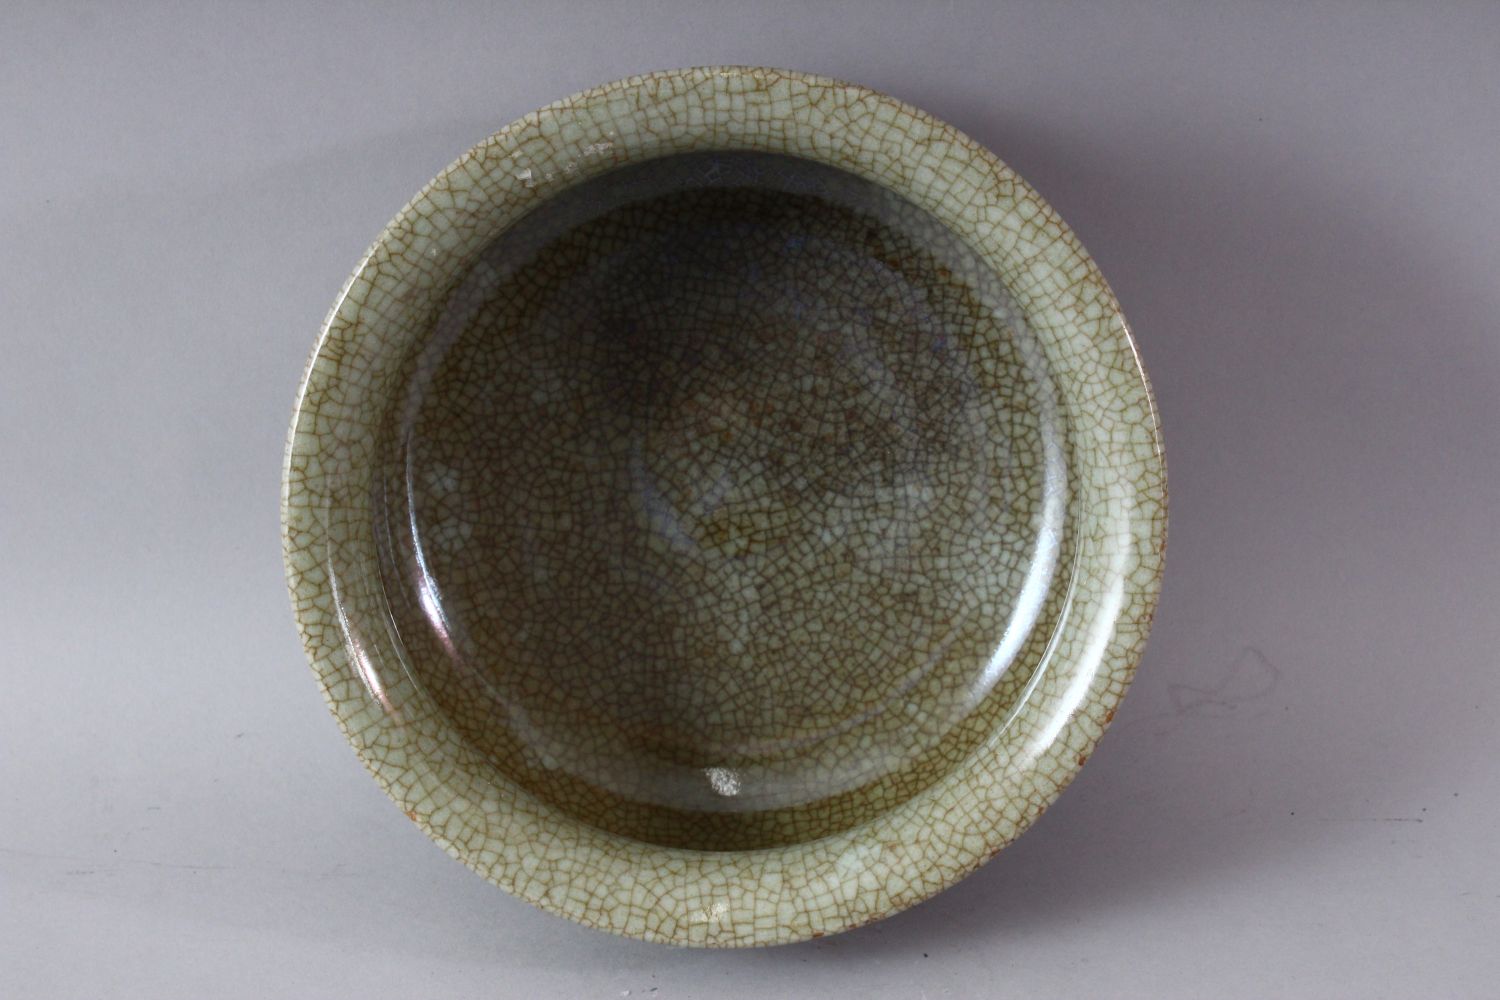 A SONG STYLE 'GE WARE' CIRCULAR POTTERY INCENSE BURNER, with crackle glaze finish, 22cm diameter. - Image 4 of 6